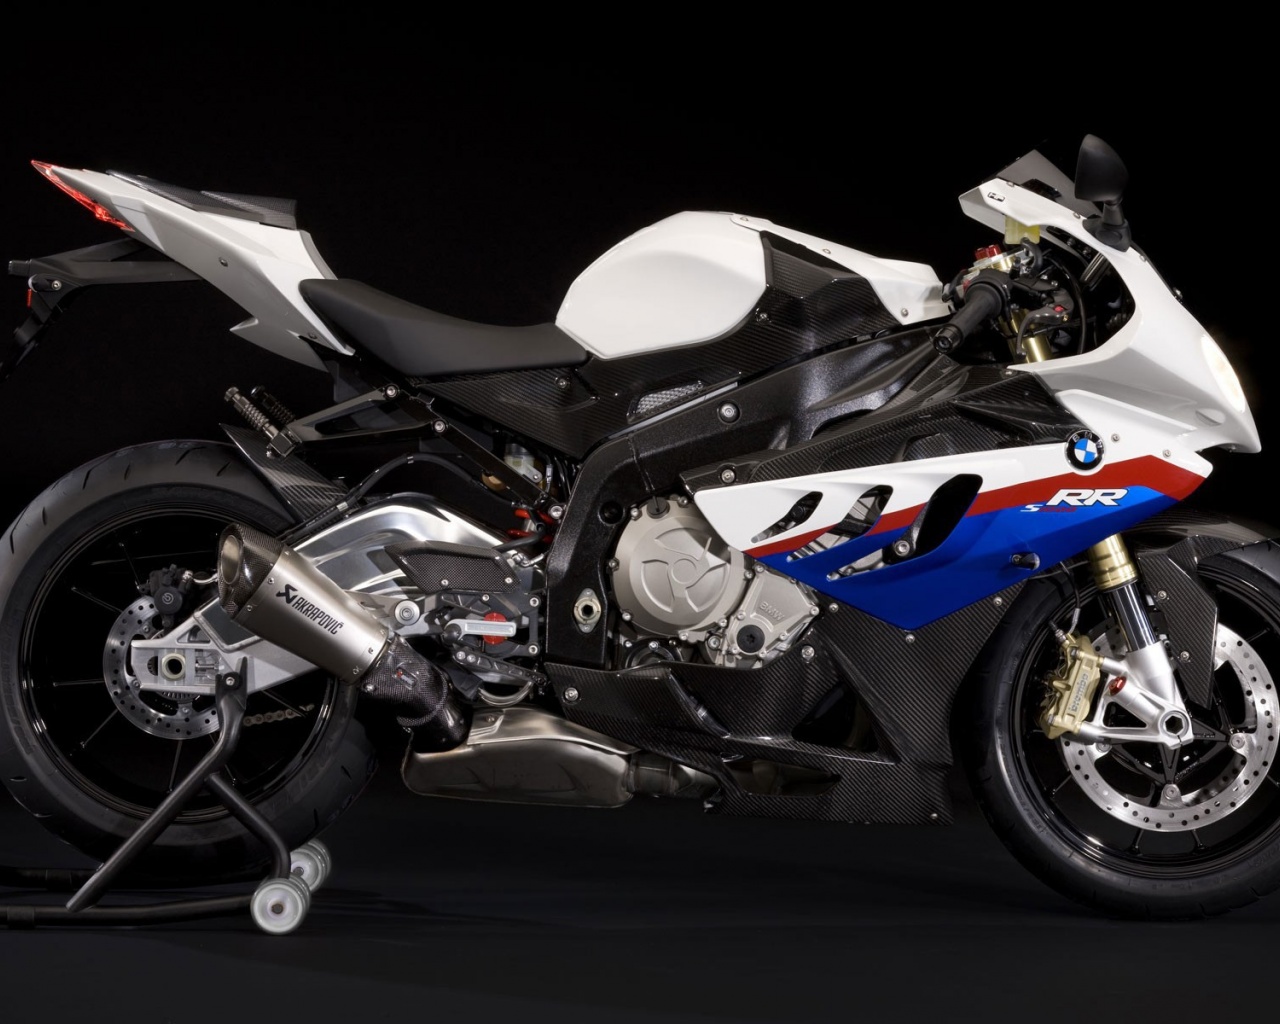 Bmw S1000rr Motorcycles